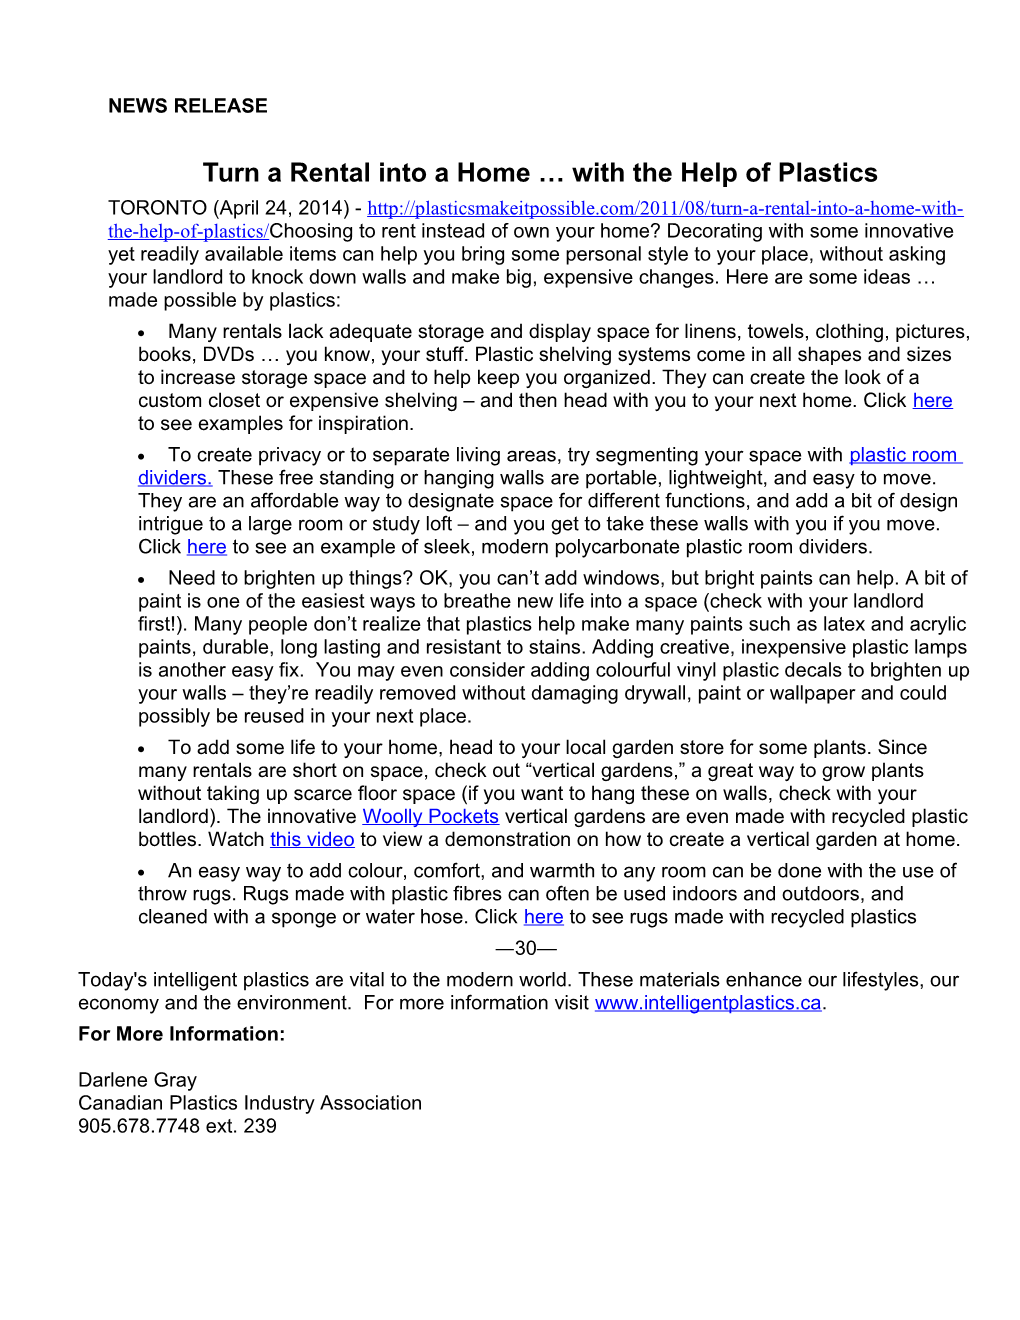 Turn a Rental Into a Home with the Help of Plastics